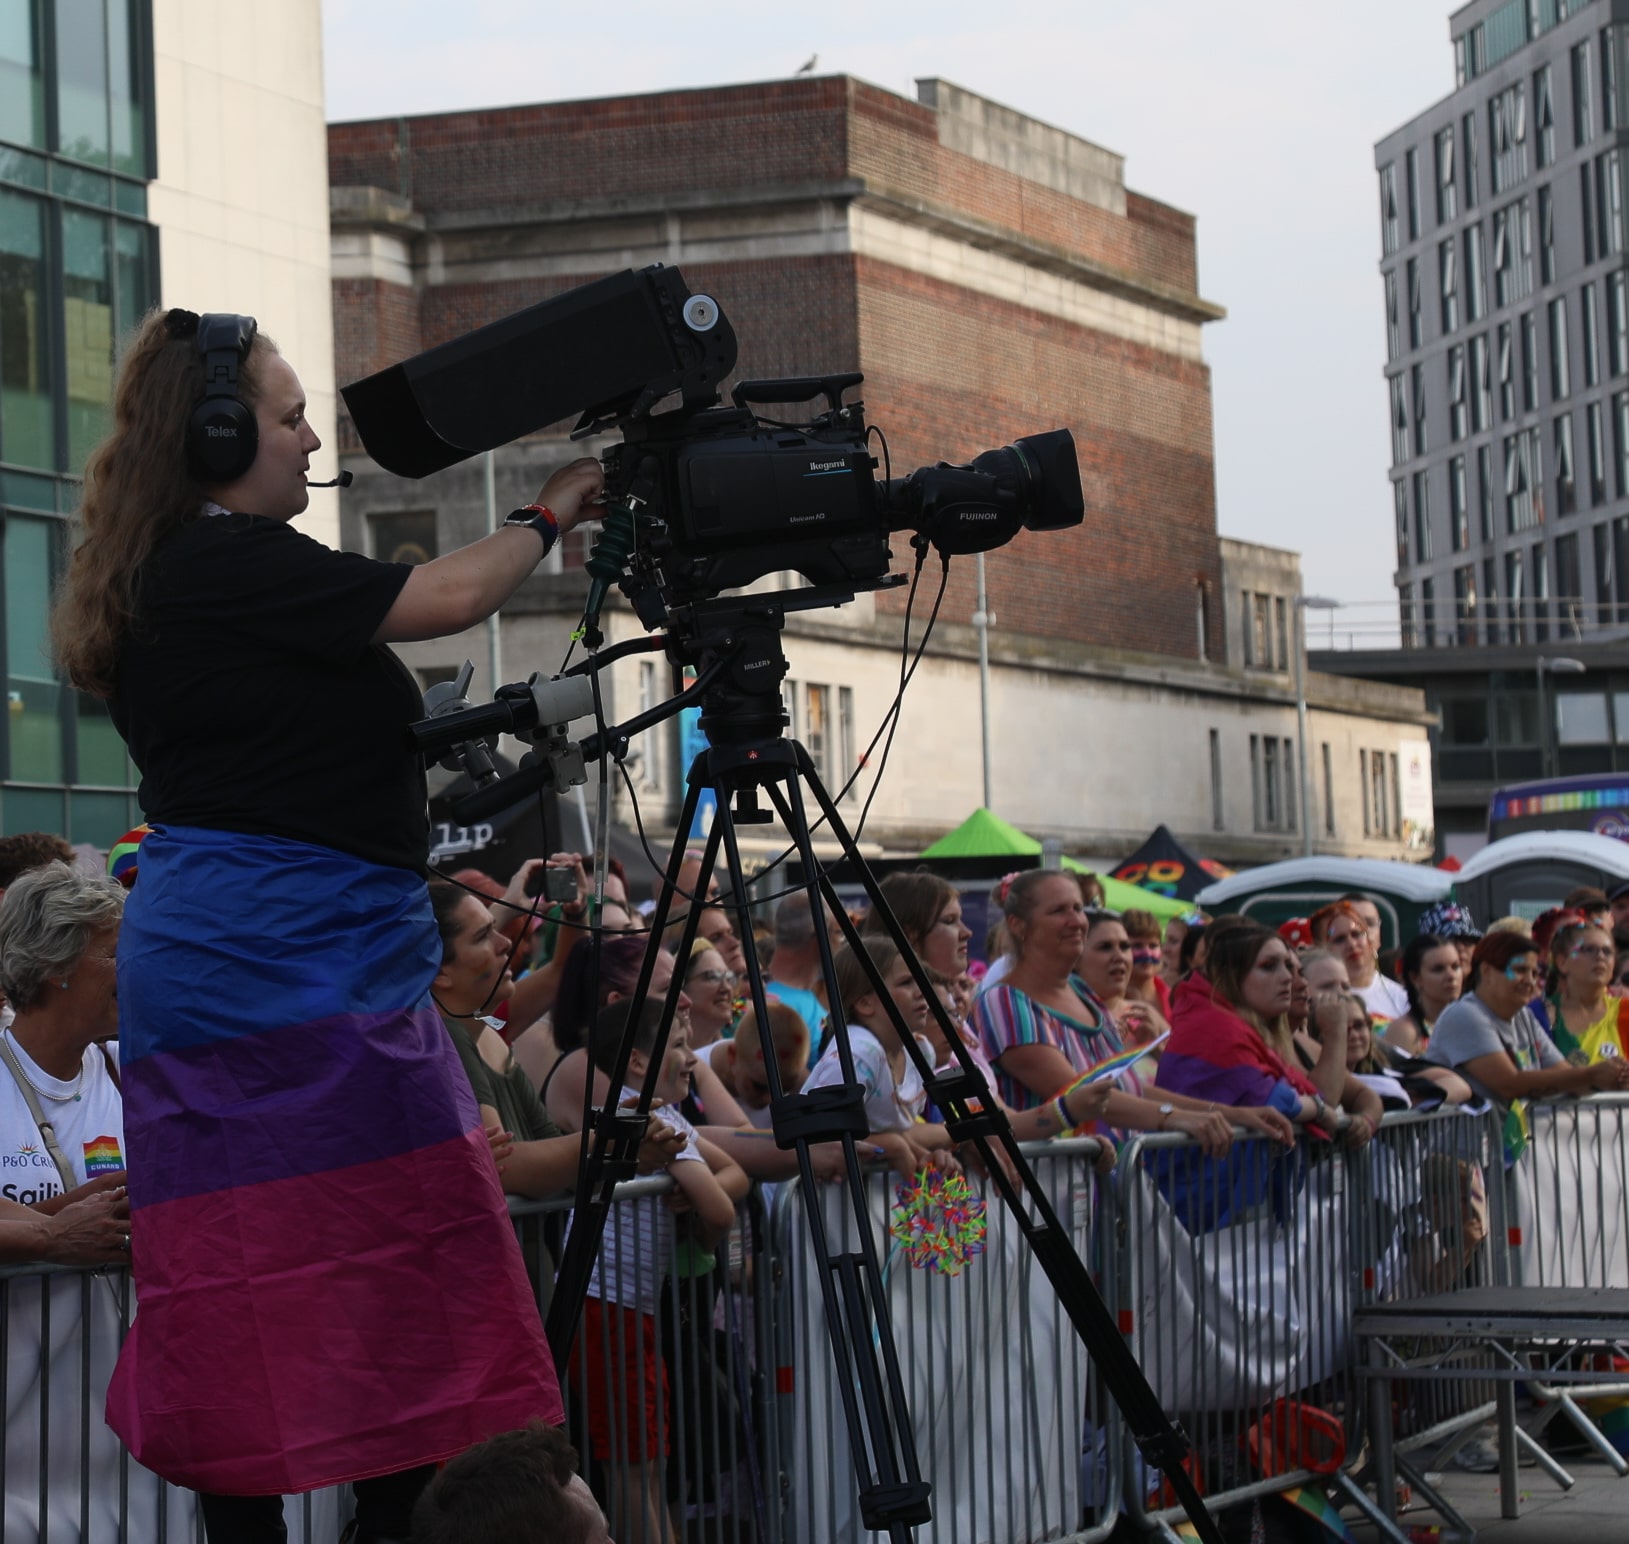 Chloe Schuil-Brewer, third year BA (Hons) Television Production student filming at Southampton Pride 2022